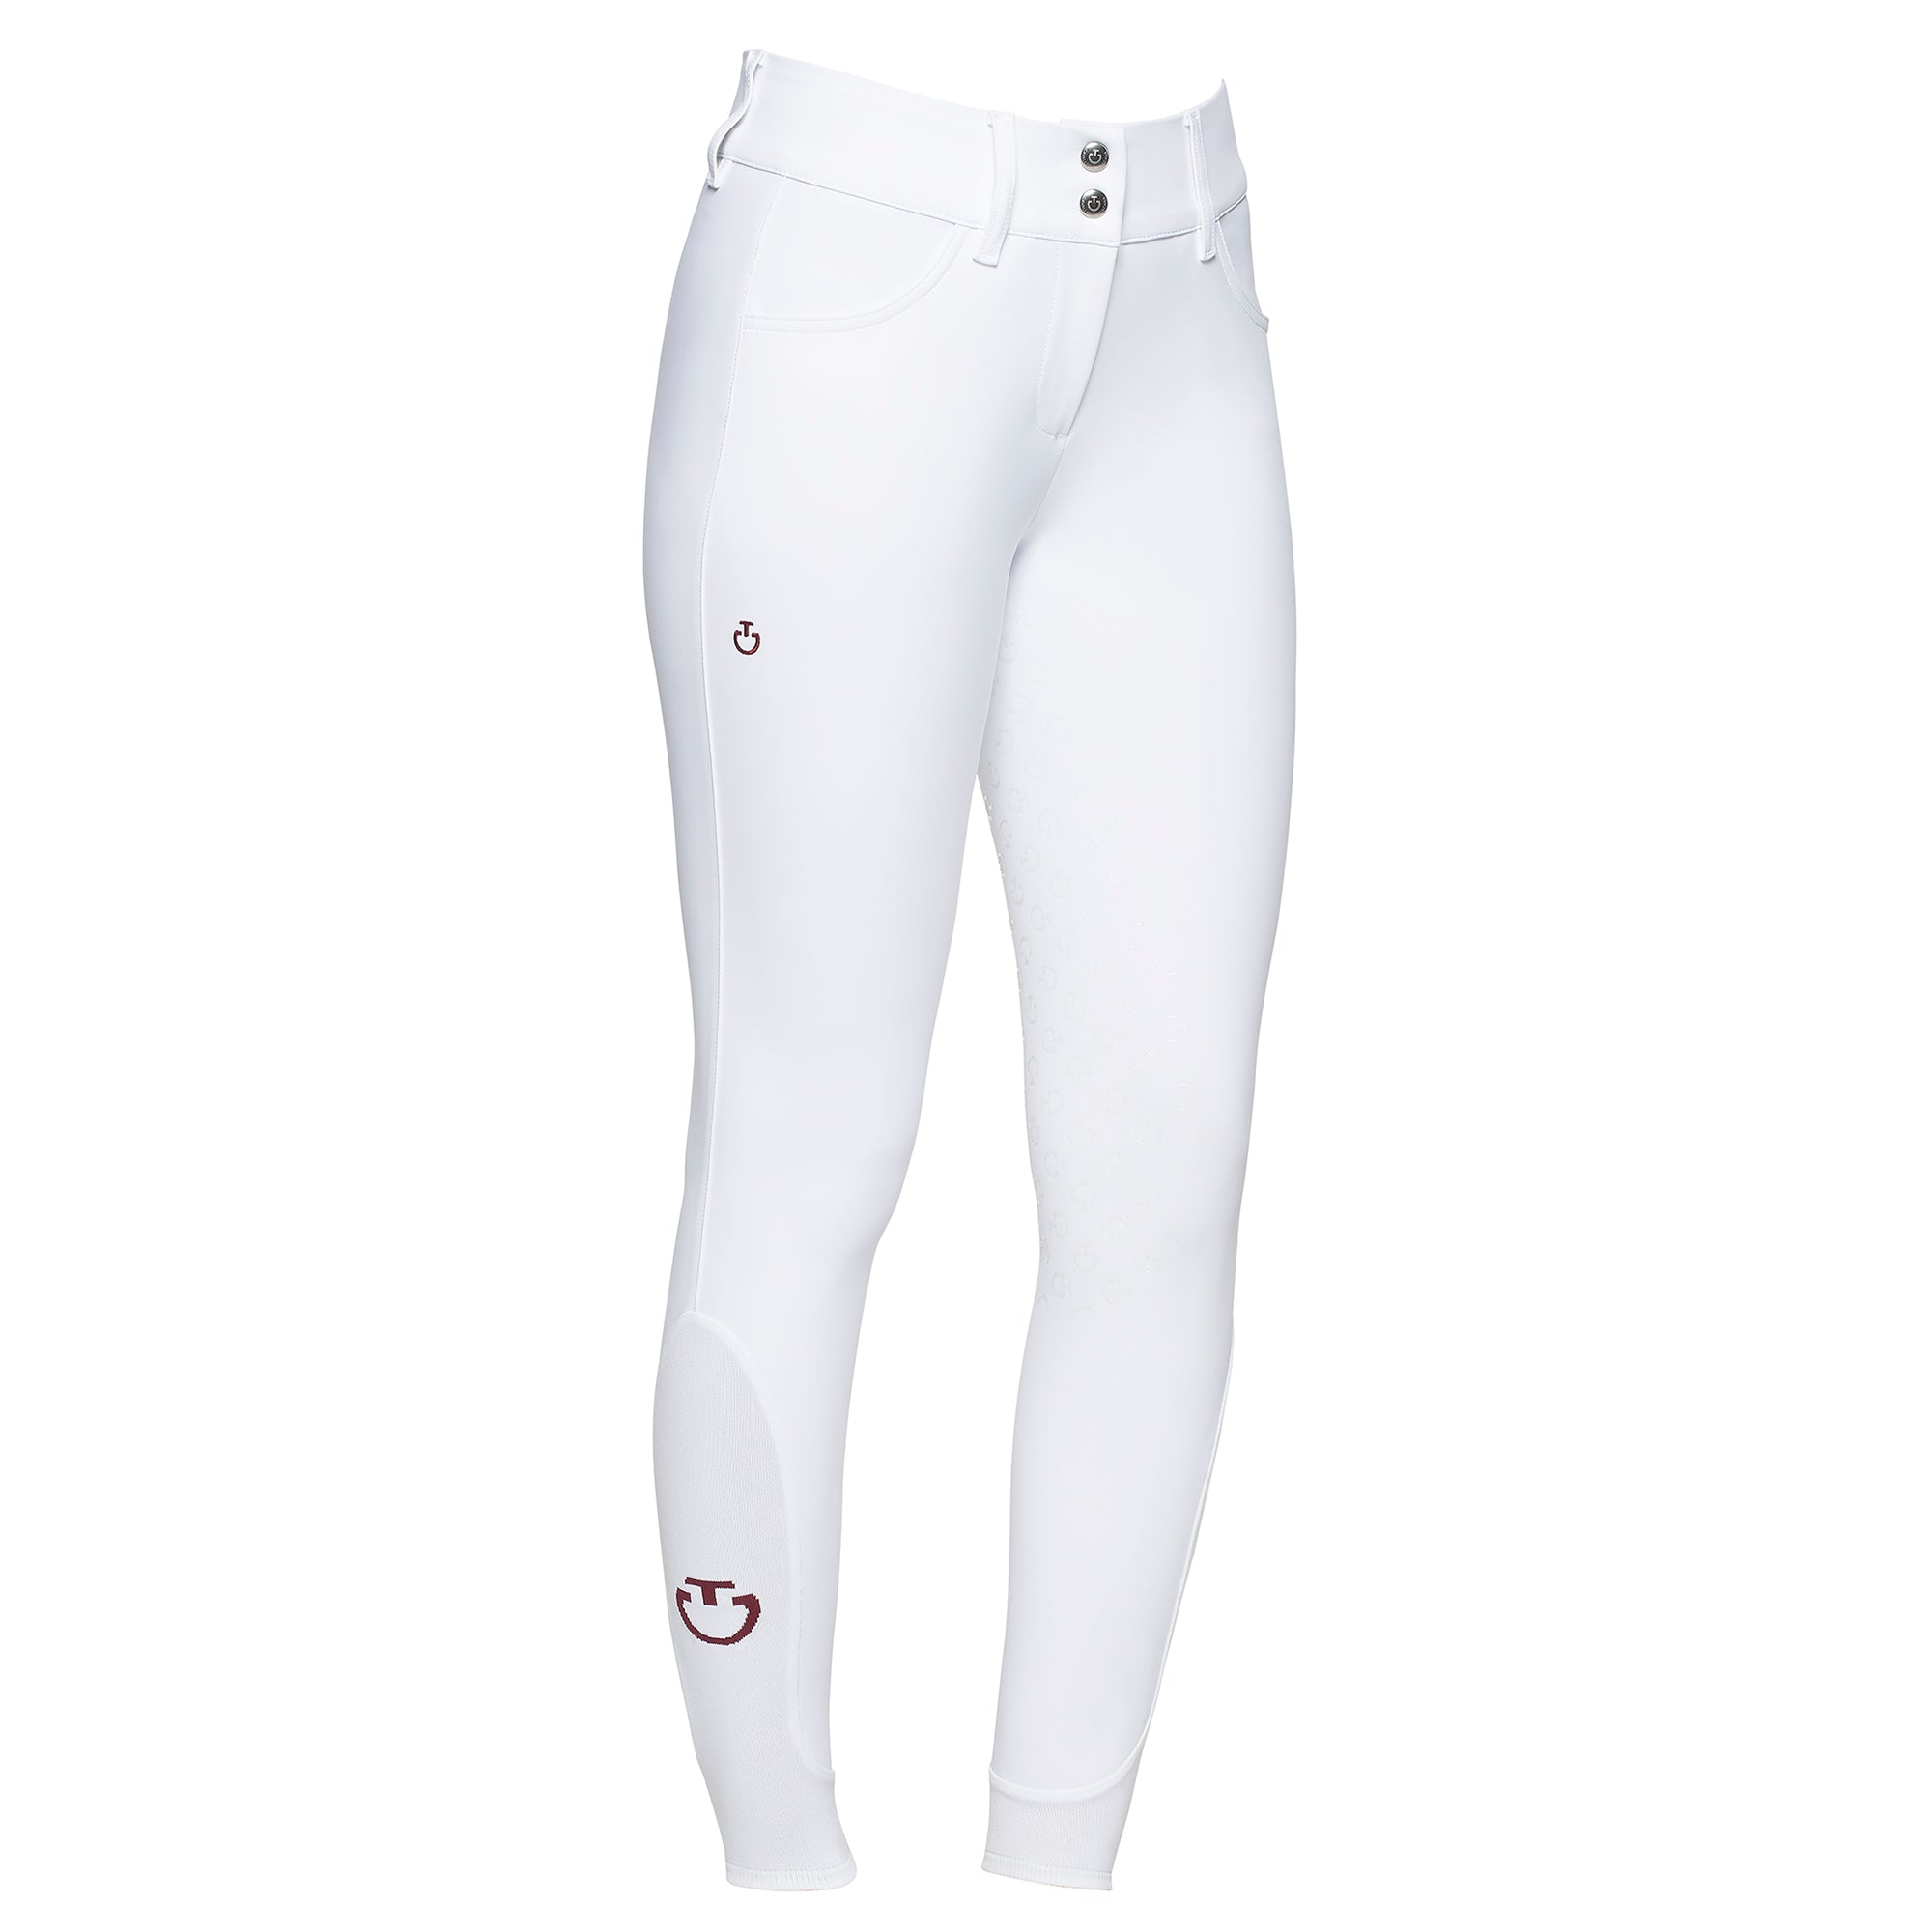 American Full Grip competition trousers